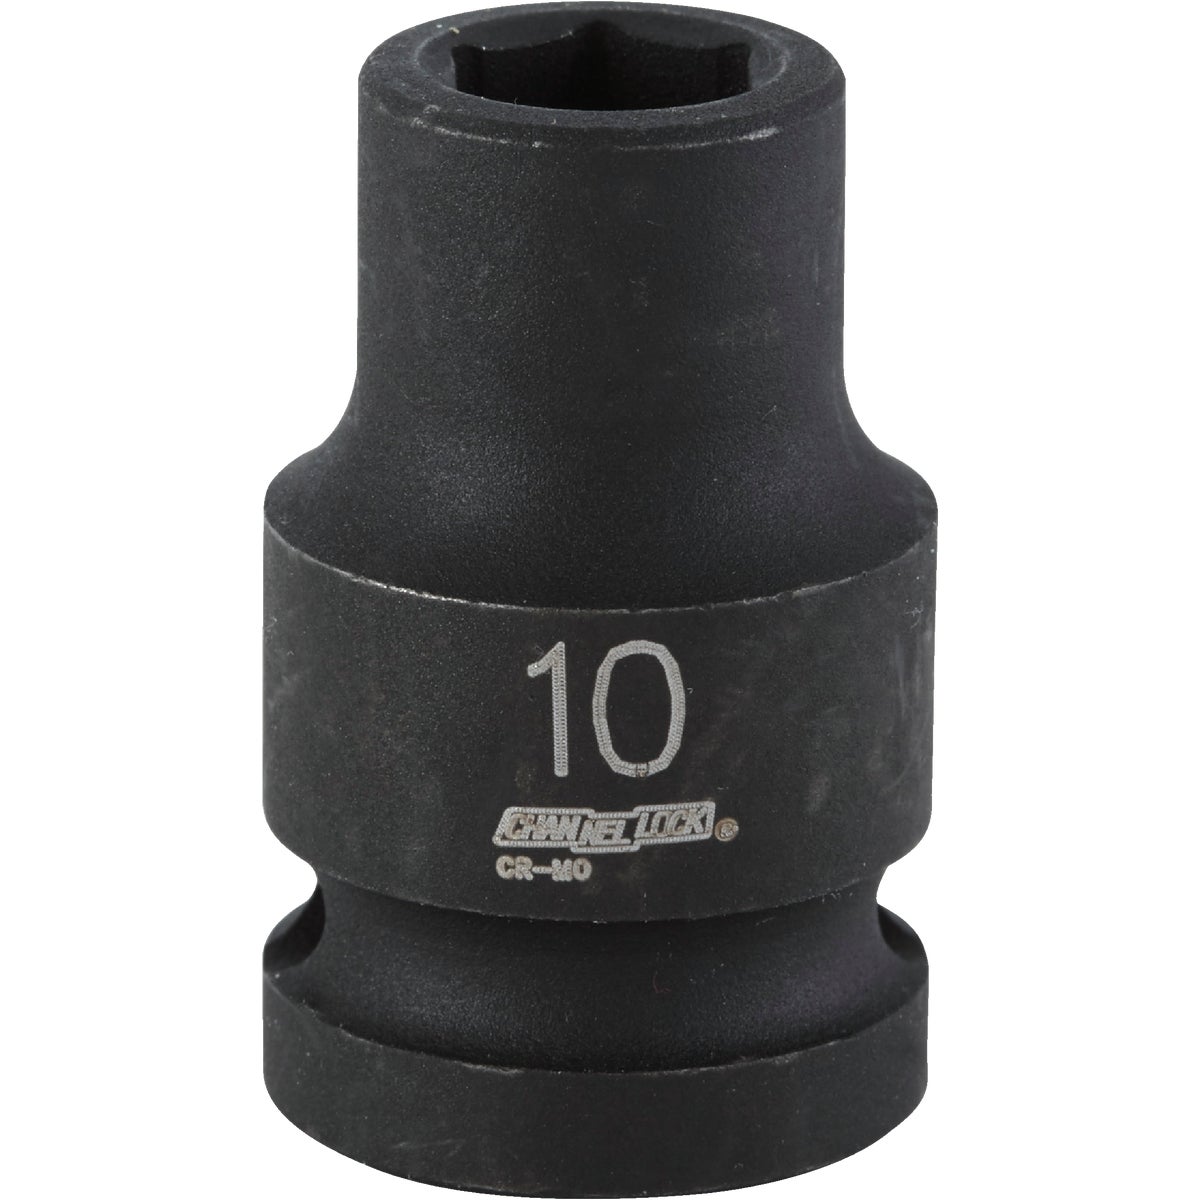 Channellock 1/2 In. Drive 10 mm 6-Point Shallow Metric Impact Socket